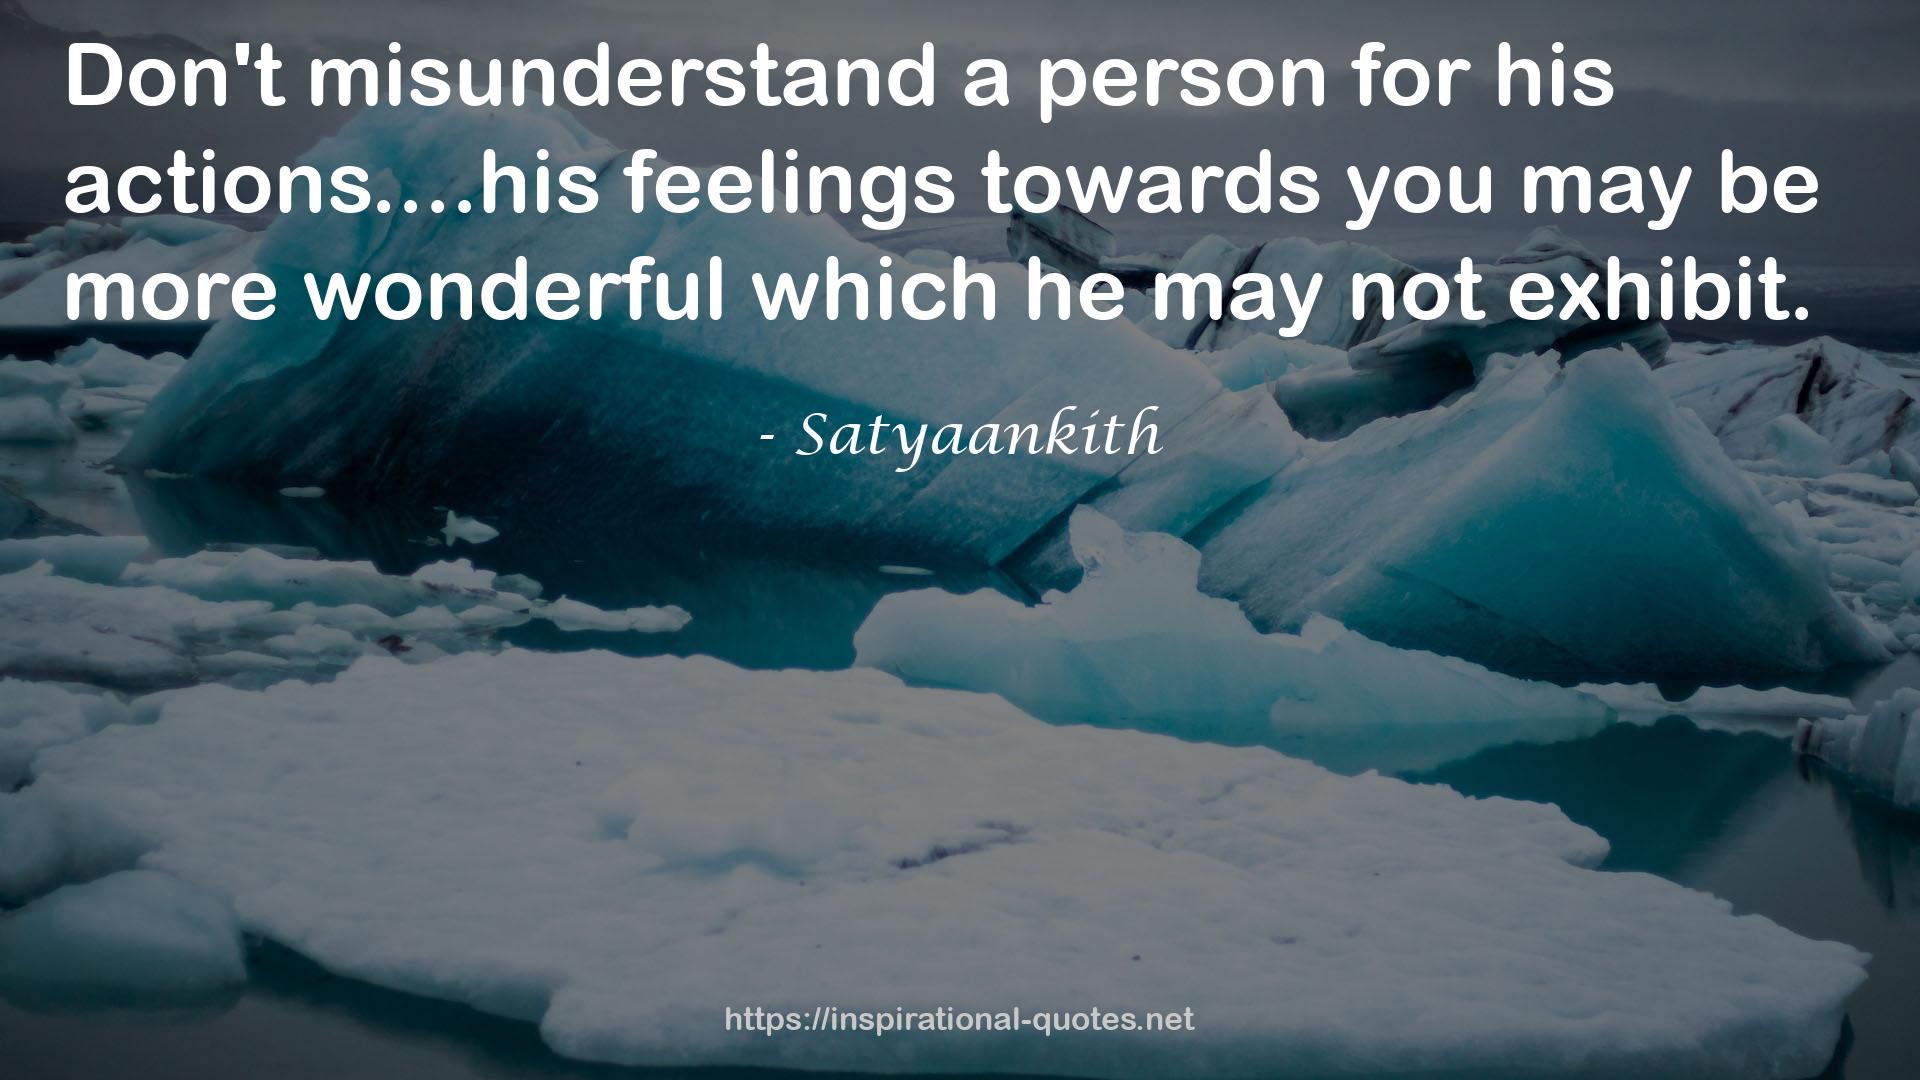 Satyaankith QUOTES